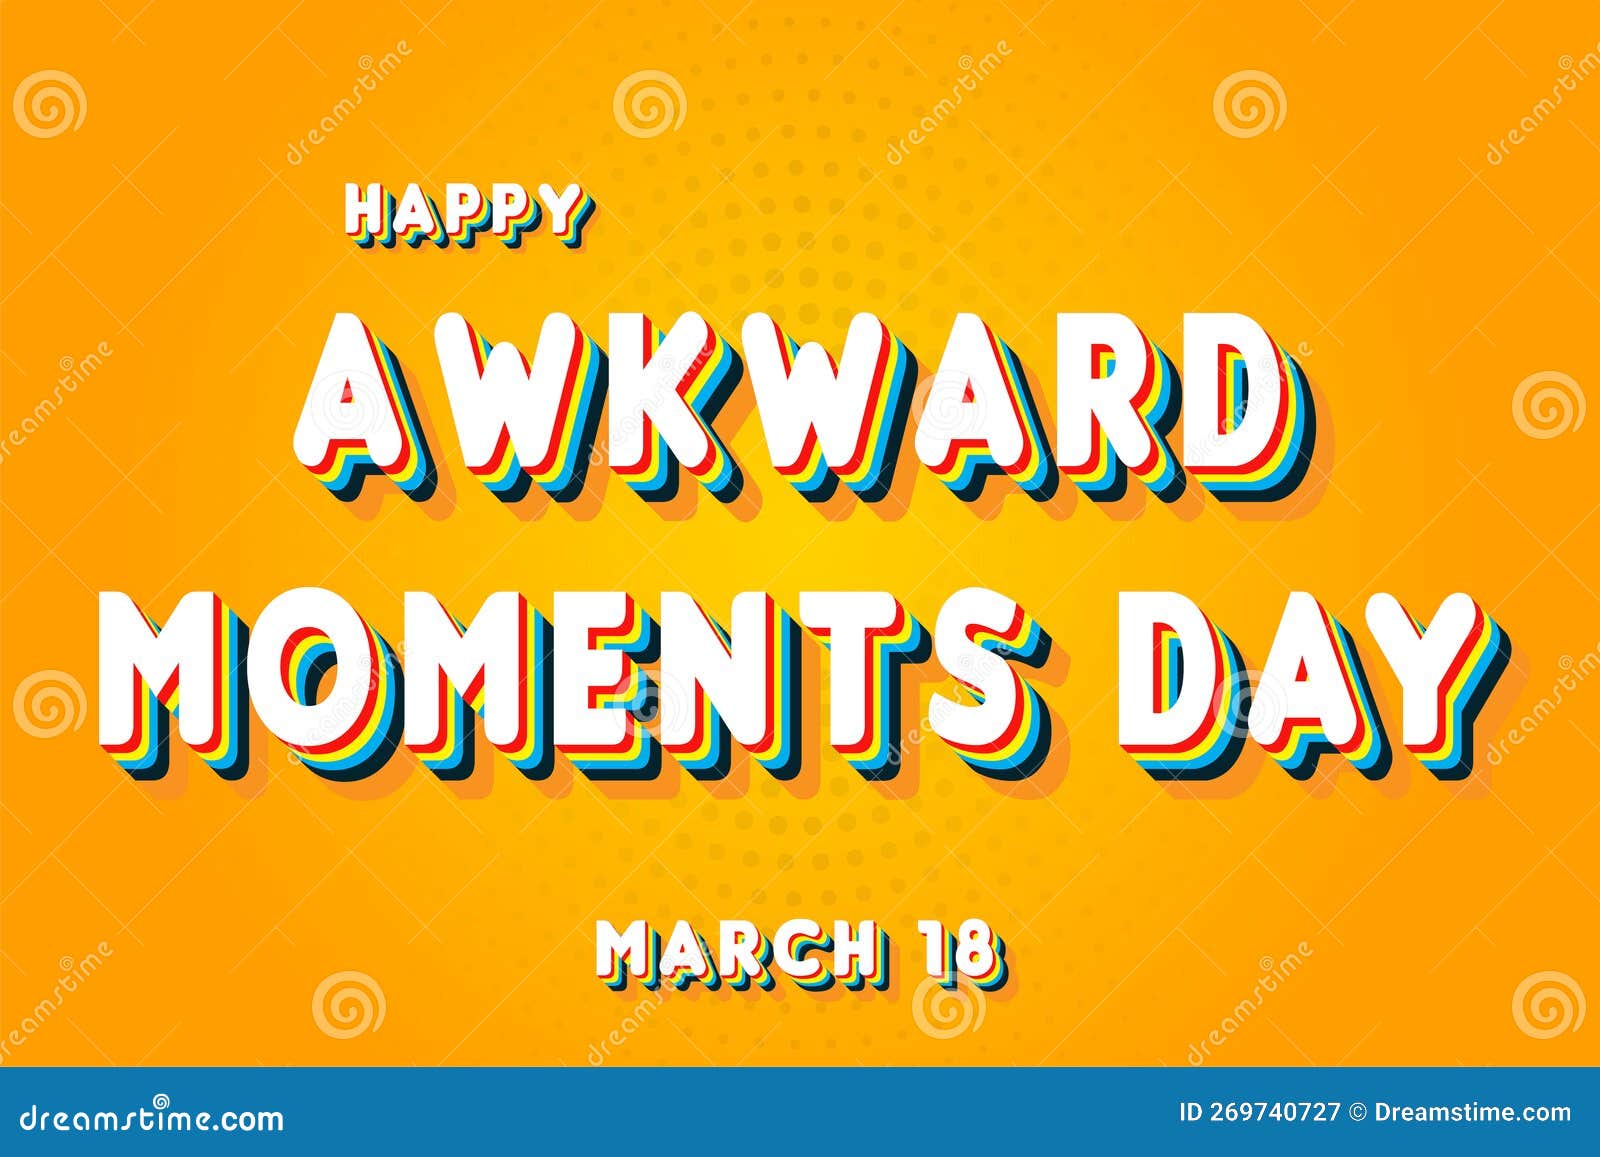 awkward moments pictures